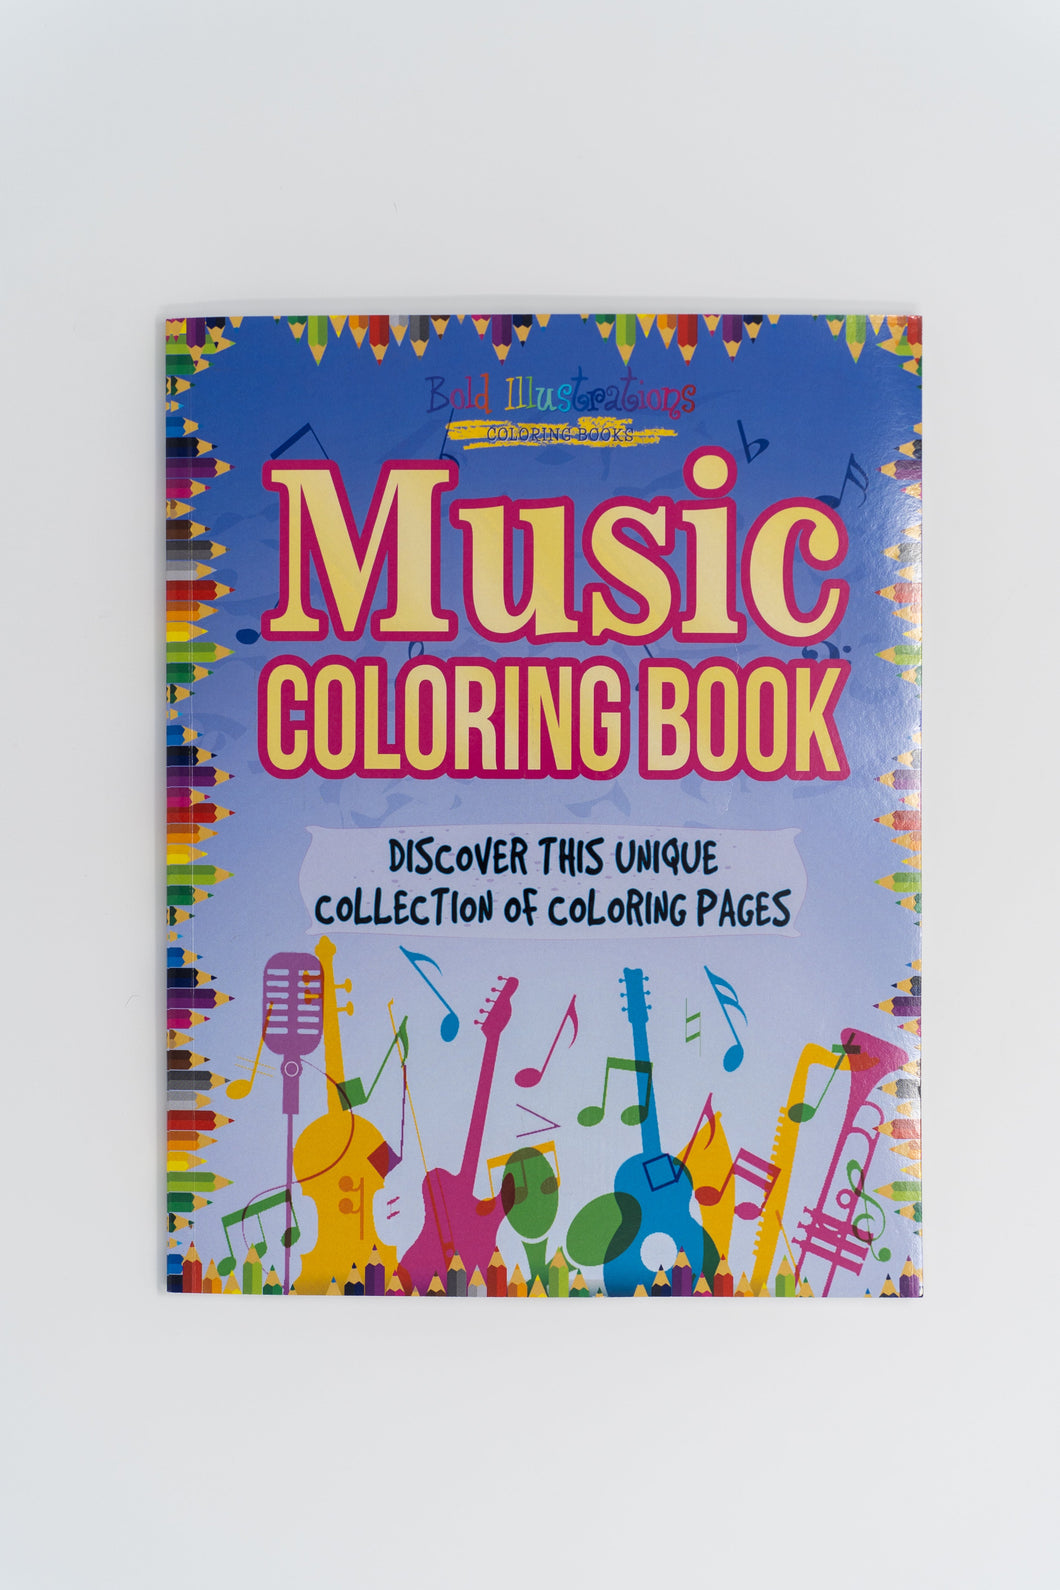 Book - Music Coloring Book! Discover This Unique Collection of Coloring Pages